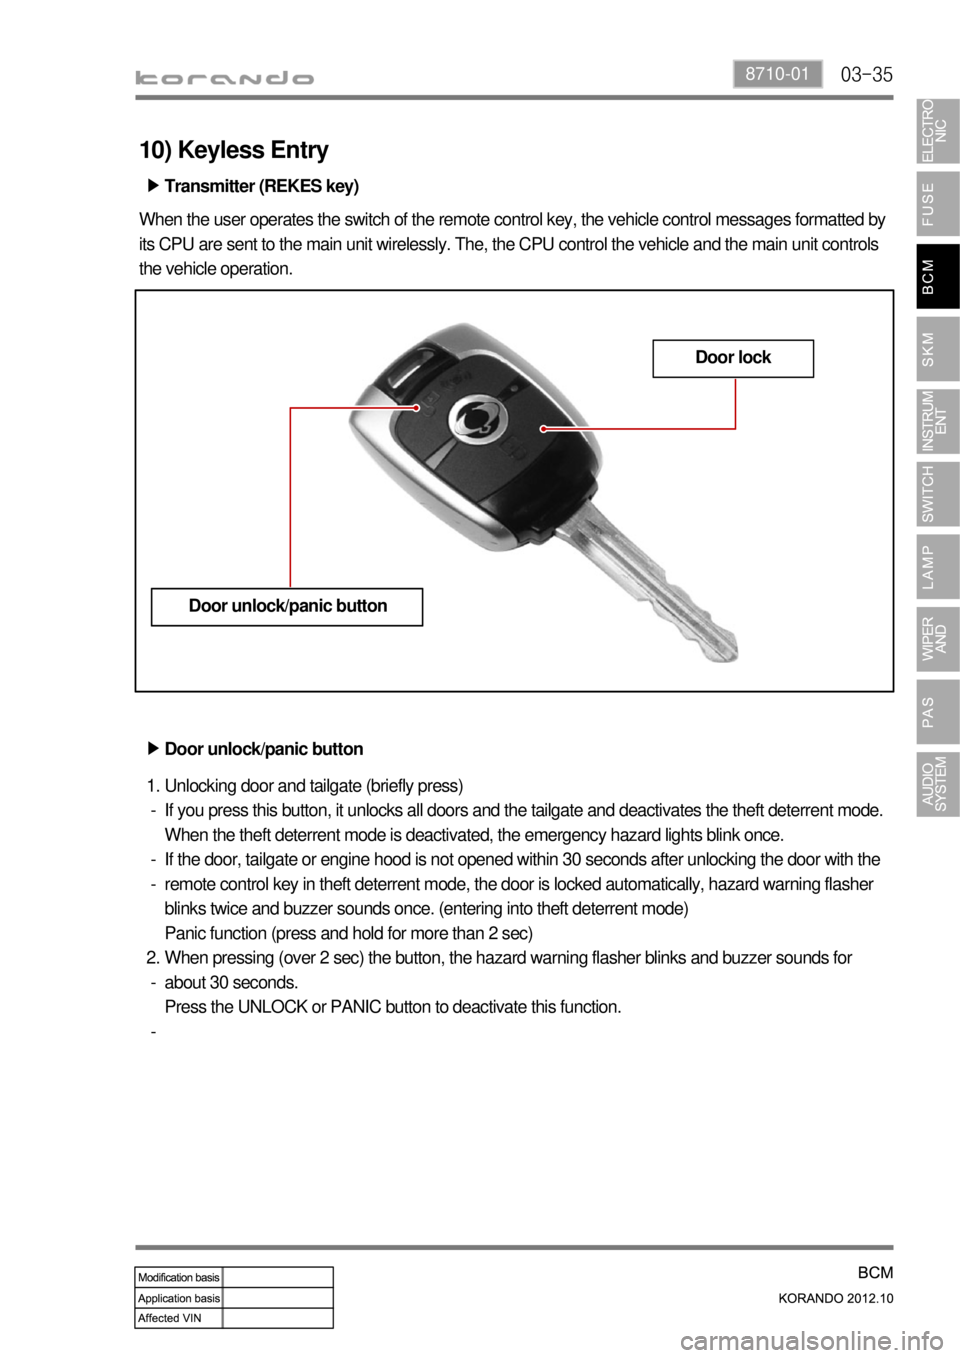 SSANGYONG KORANDO 2012  Service Manual 03-358710-01
10) Keyless Entry
Transmitter (REKES key)      ▶
When the user operates the switch of the remote control key, the vehicle control messages formatted by 
its CPU are sent to the main uni